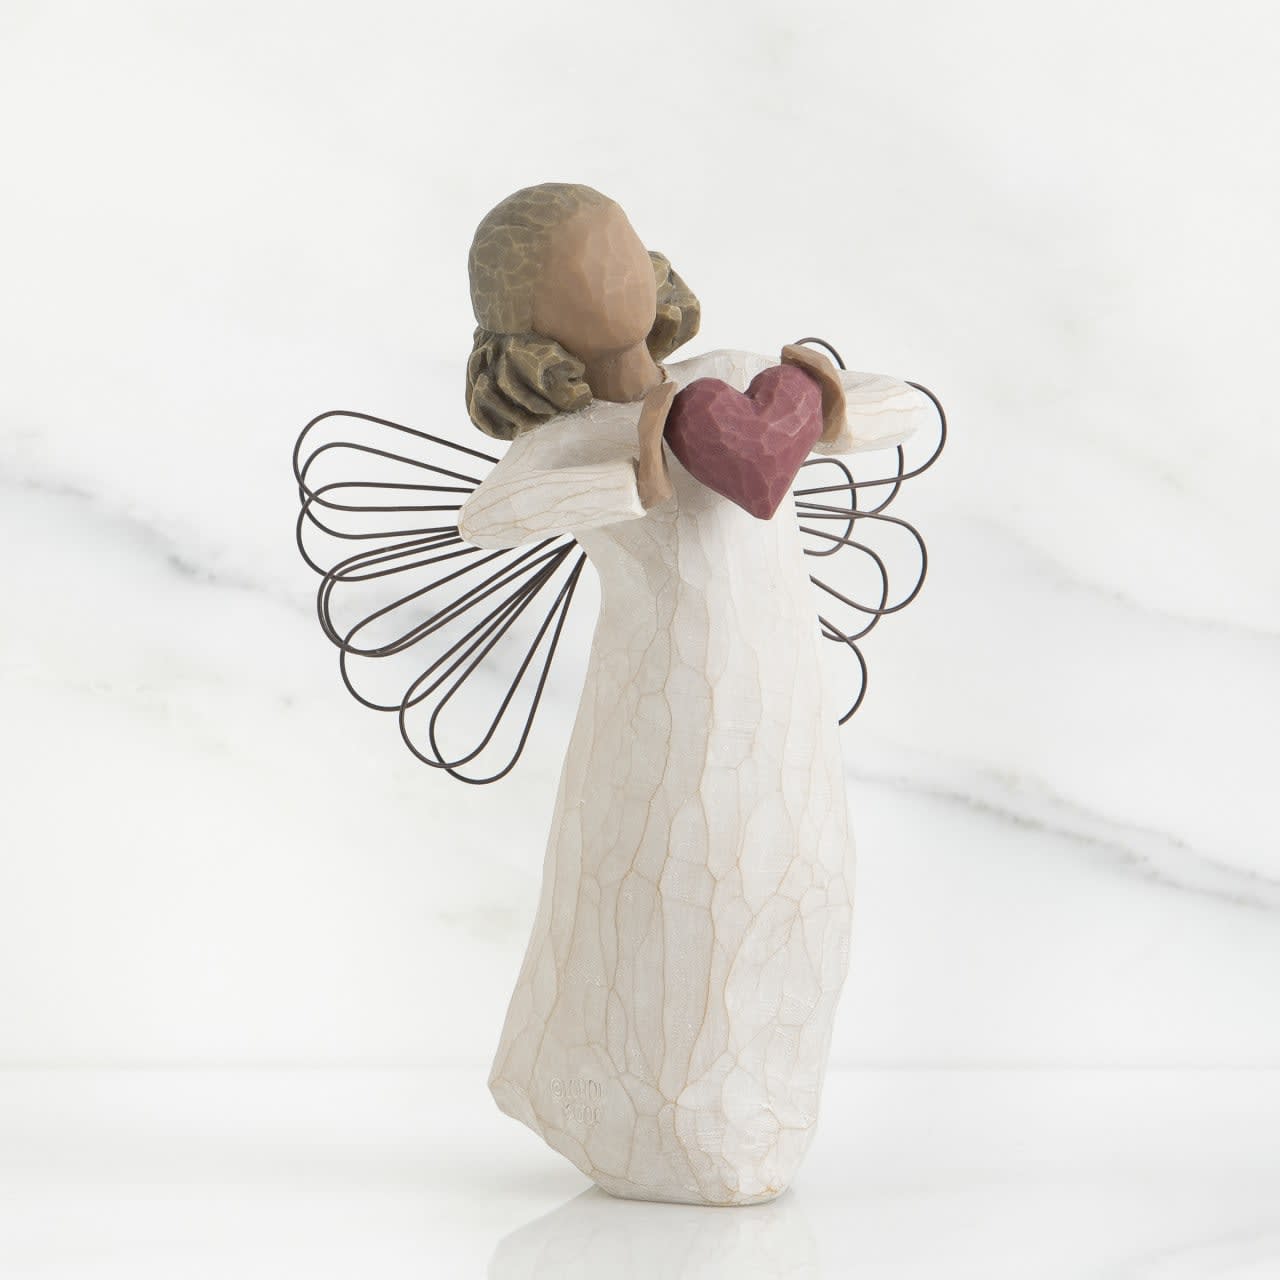 WILLOW TREE WITH LOVE  - A wedding, anniversary or Valentine’s Day gift that expresses love and caring.